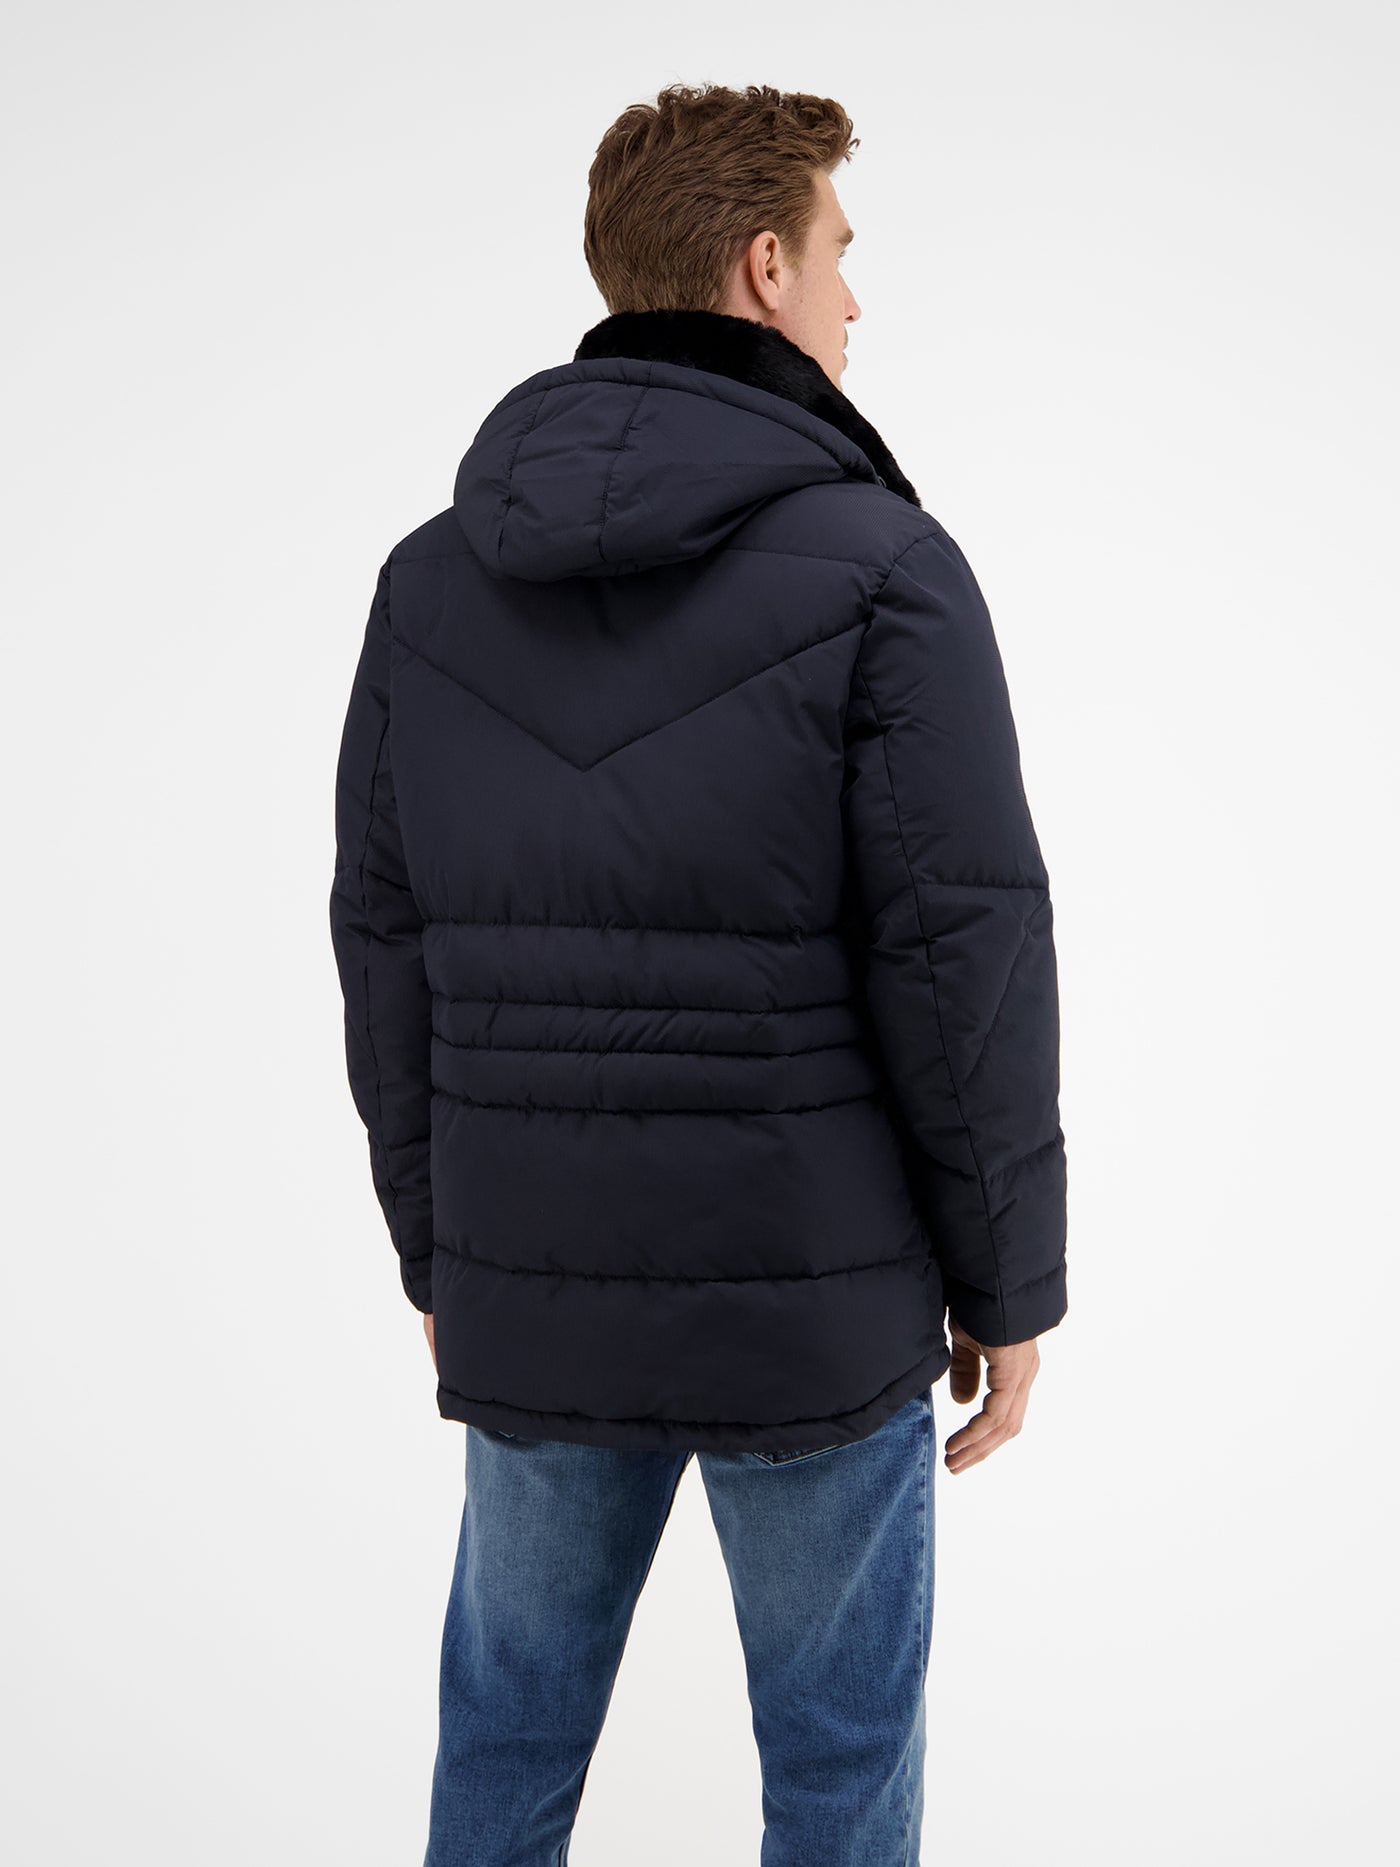 Functional winter parka